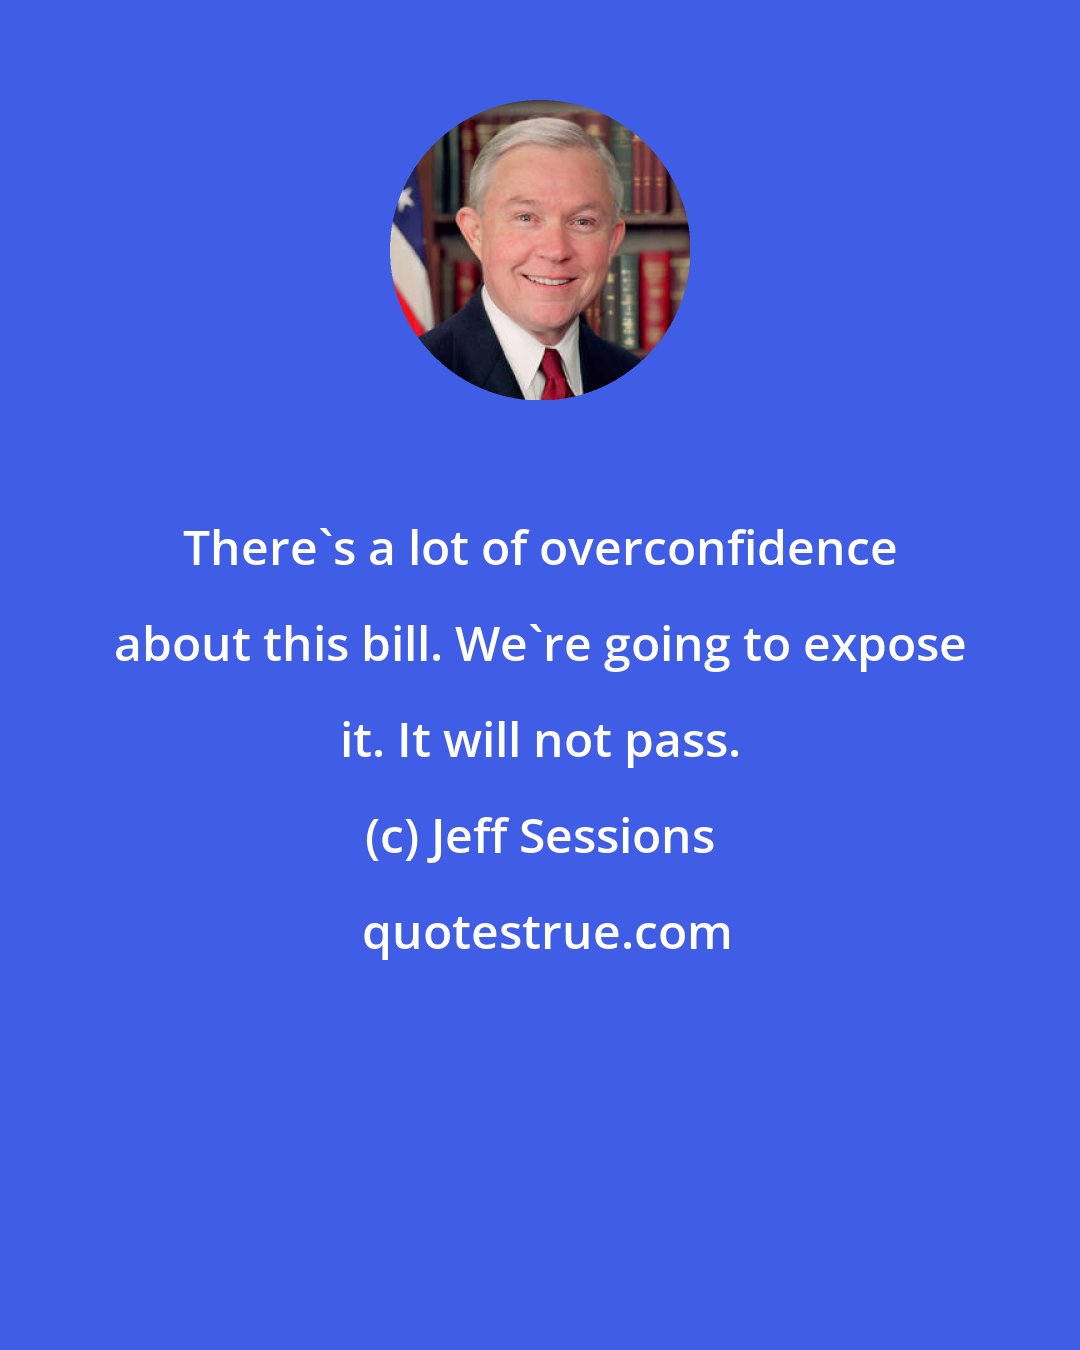 Jeff Sessions: There's a lot of overconfidence about this bill. We're going to expose it. It will not pass.